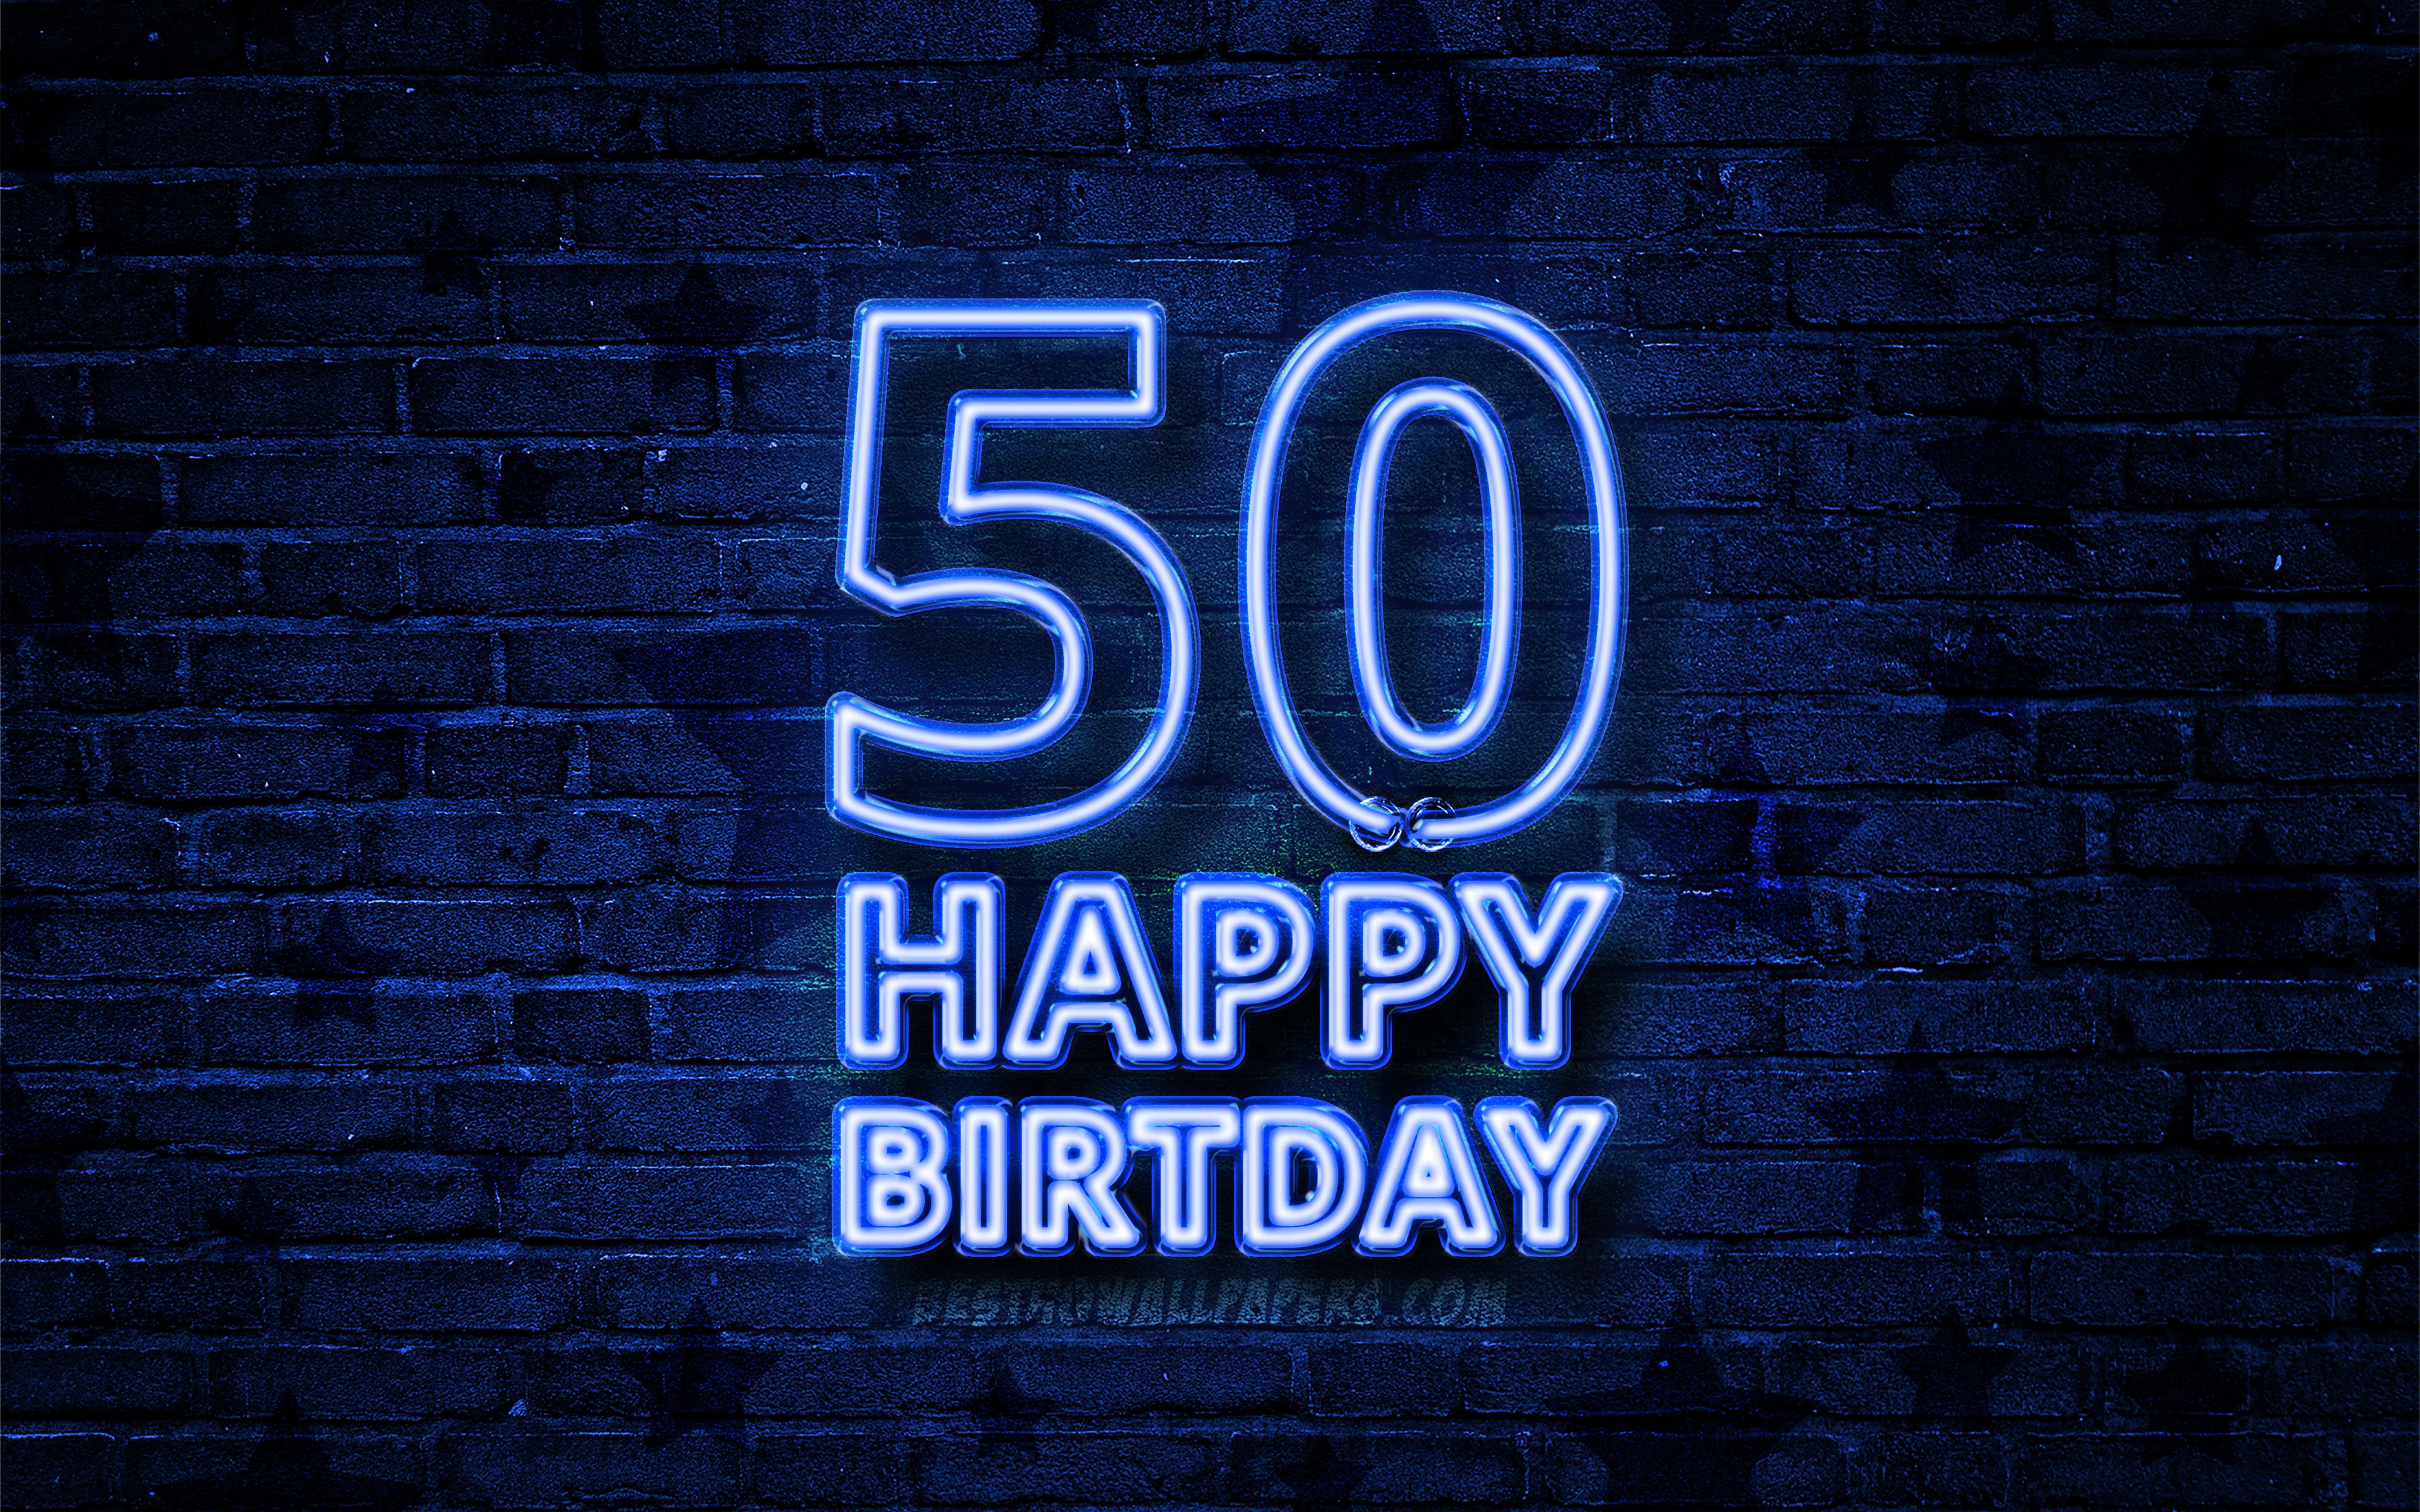 Download wallpaper Happy 50 Years Birthday, 4k, blue neon text, 50th Birthday Party, blue brickwall, Happy 50th birthday, Birthday concept, Birthday Party, 50th Birthday for desktop with resolution 3840x2400. High Quality HD